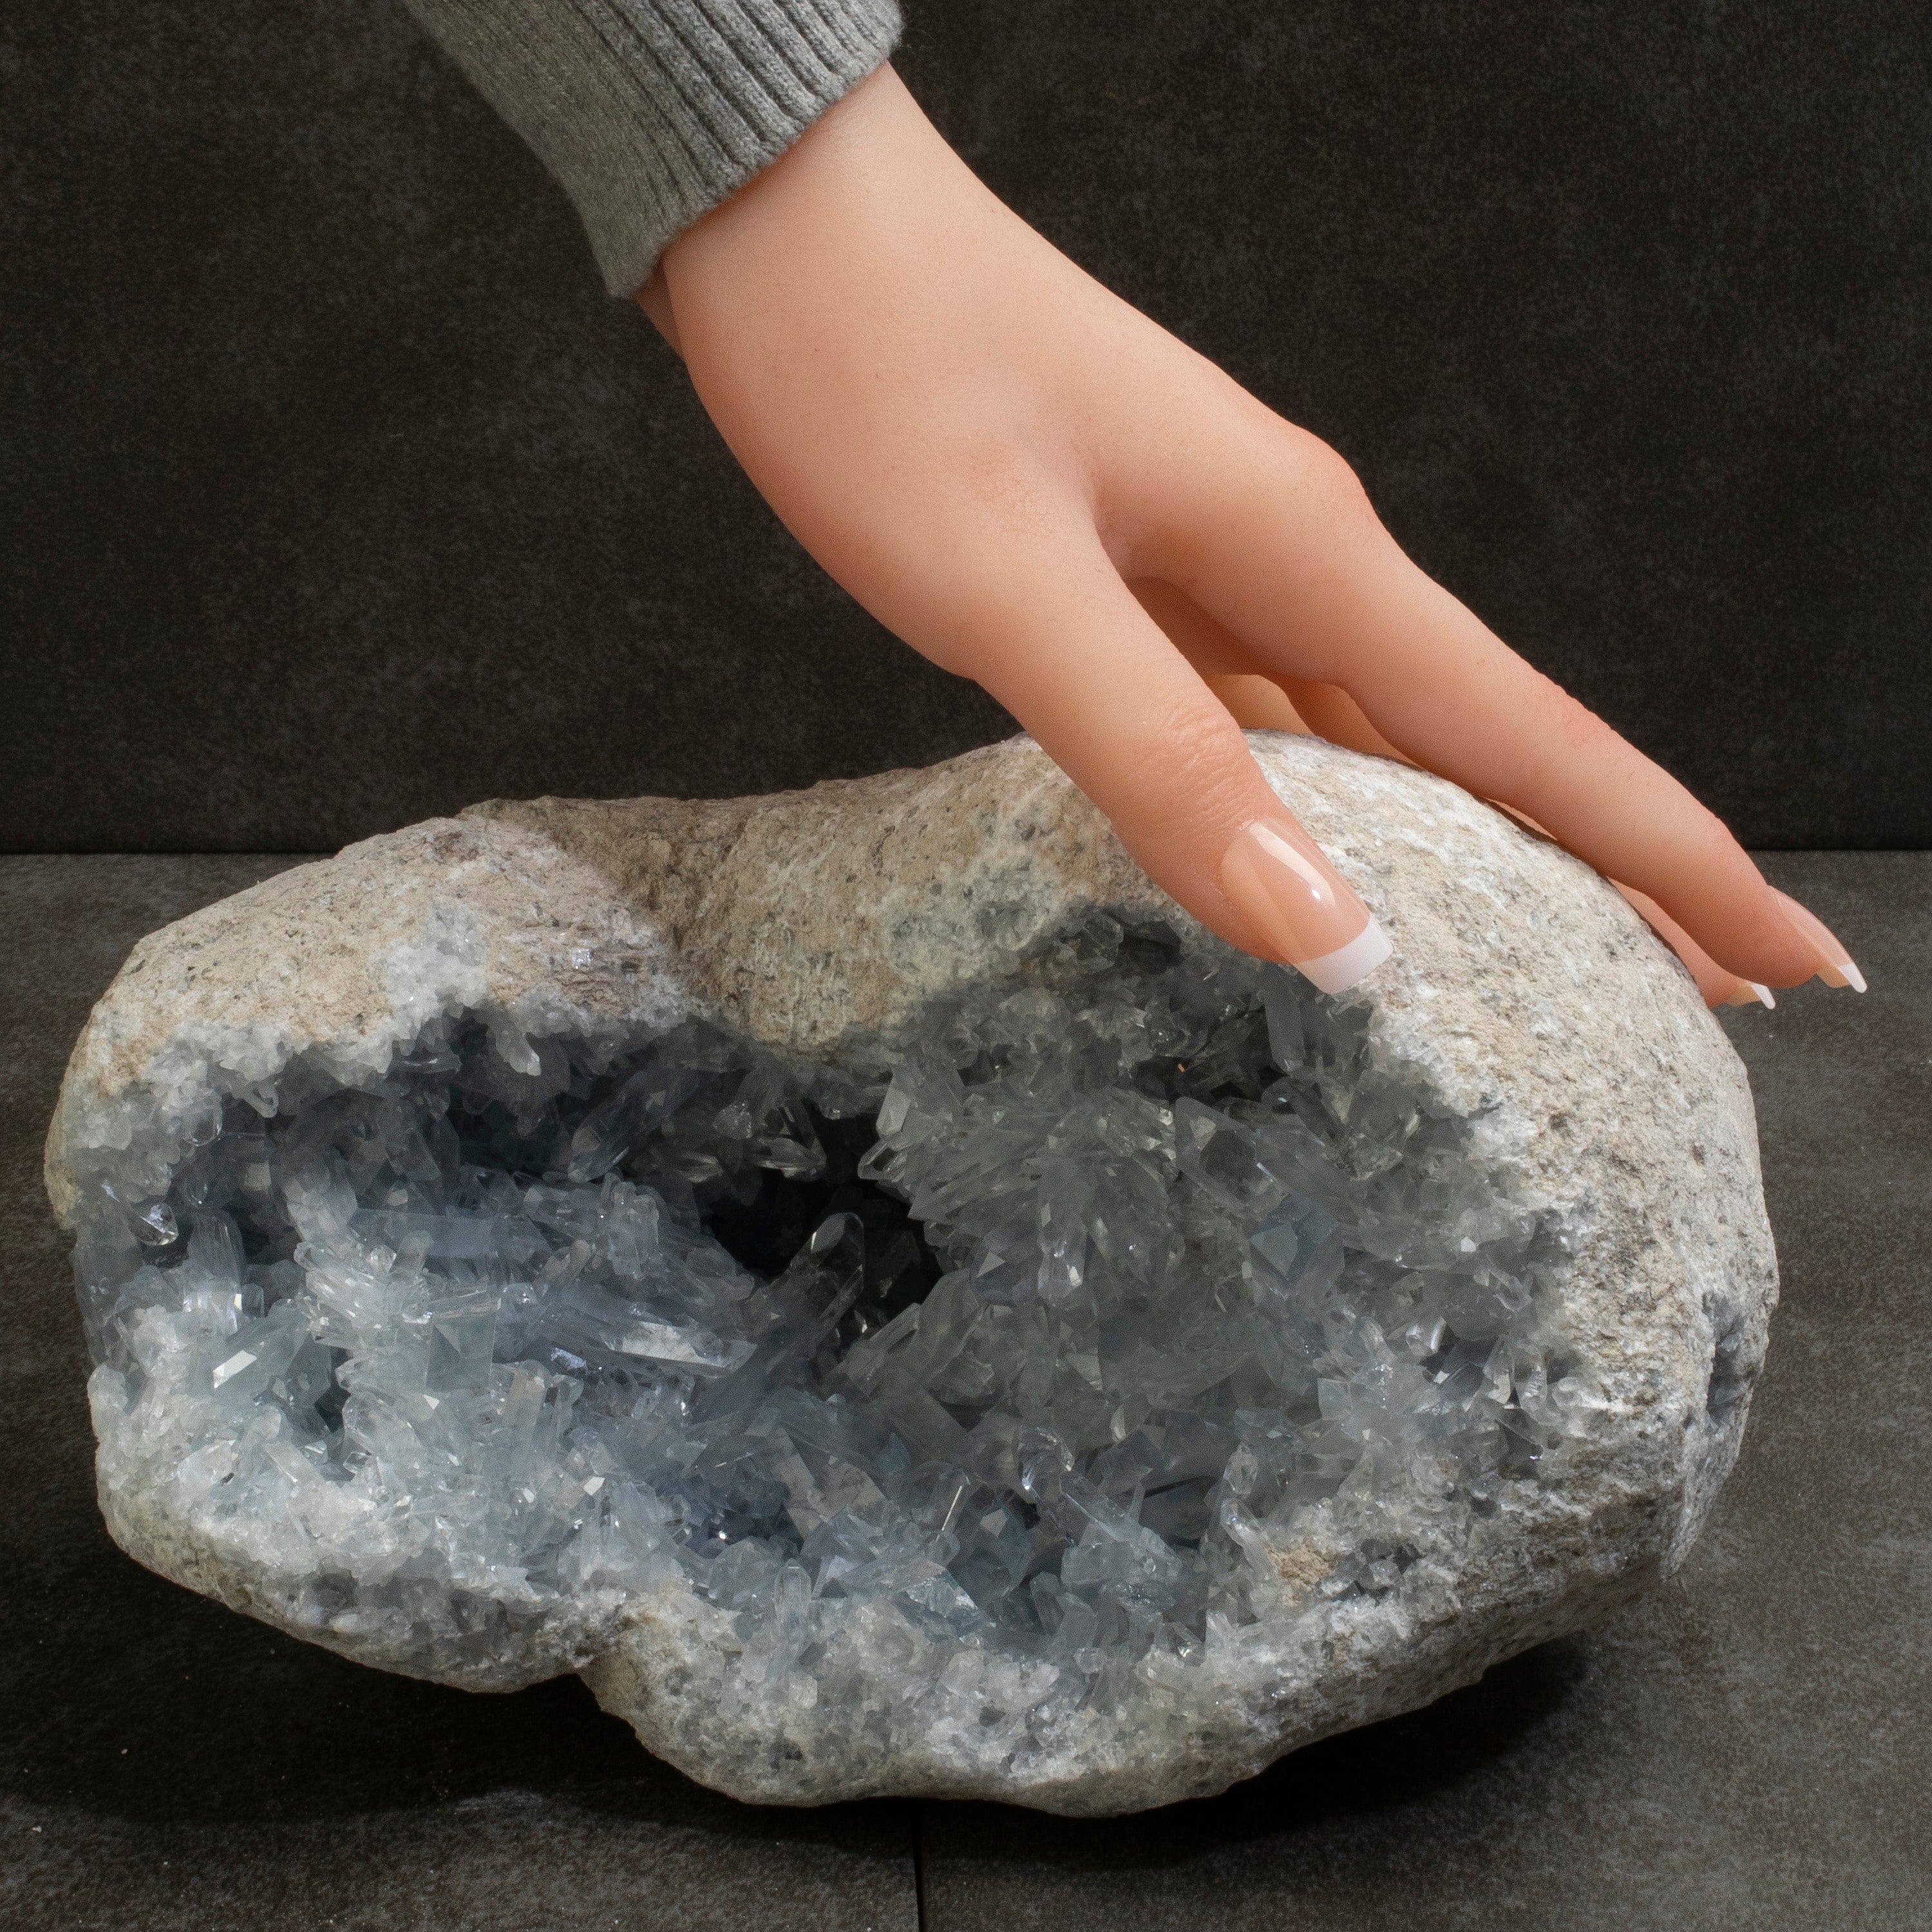 Kalifano Celestite Natural Celestite Crystal Cluster Geode from Madagascar - 8.5 in. CG1600.001